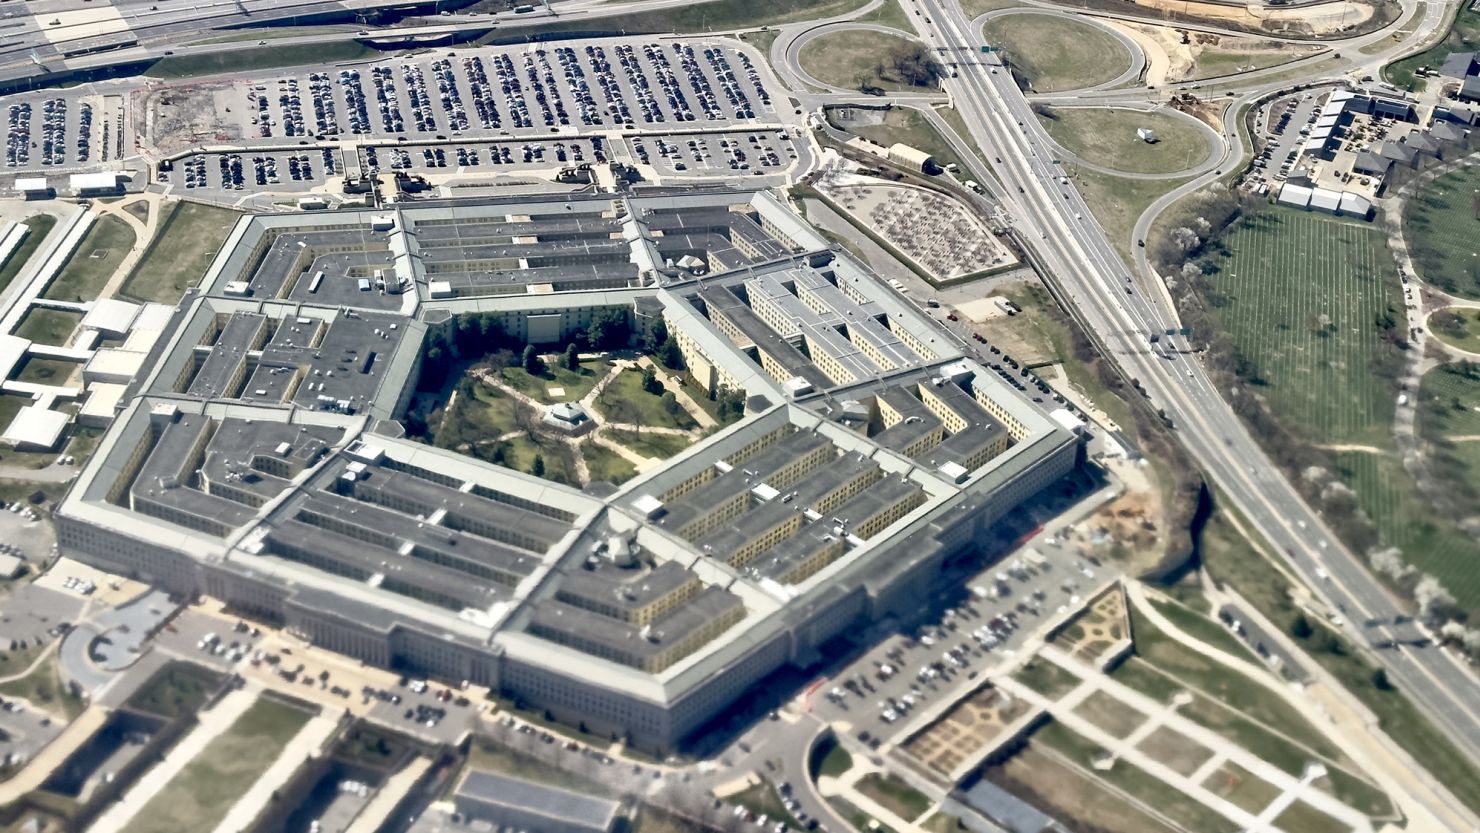 The Pentagon is shown in this aerial photograph taken on March 8, 2023.